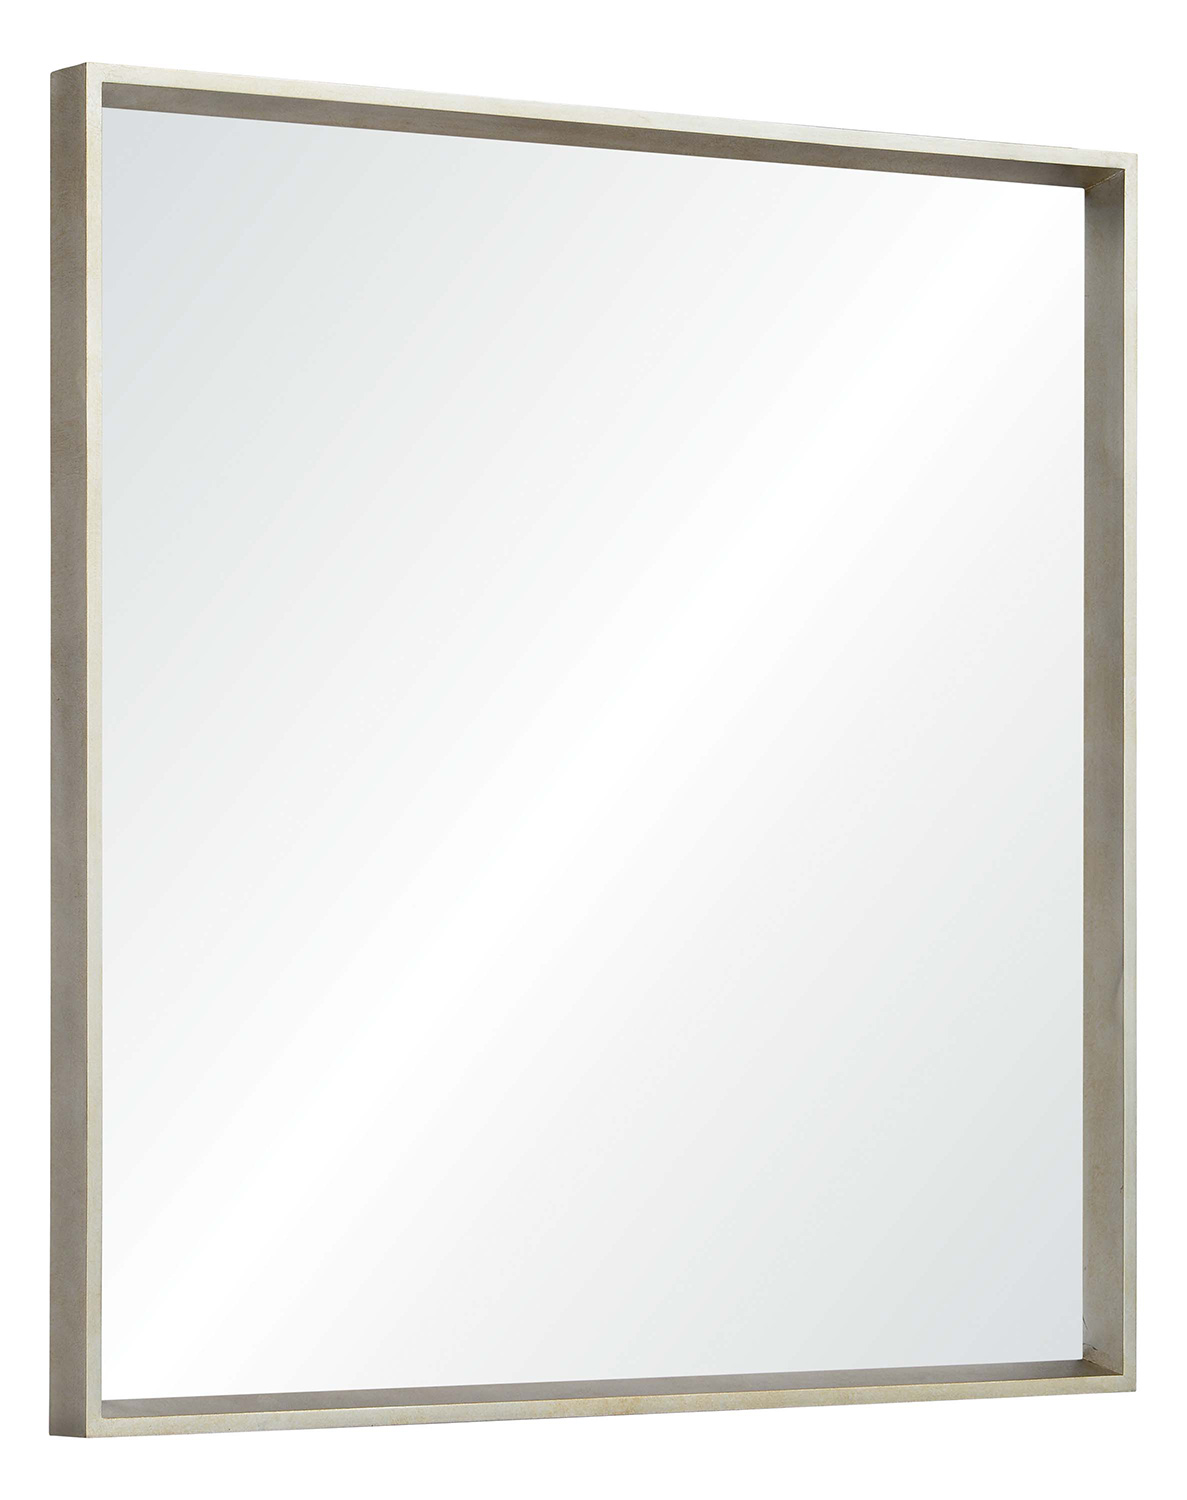 Ren-Wil Clearview Square Mirror - Champagne Silver Leaf